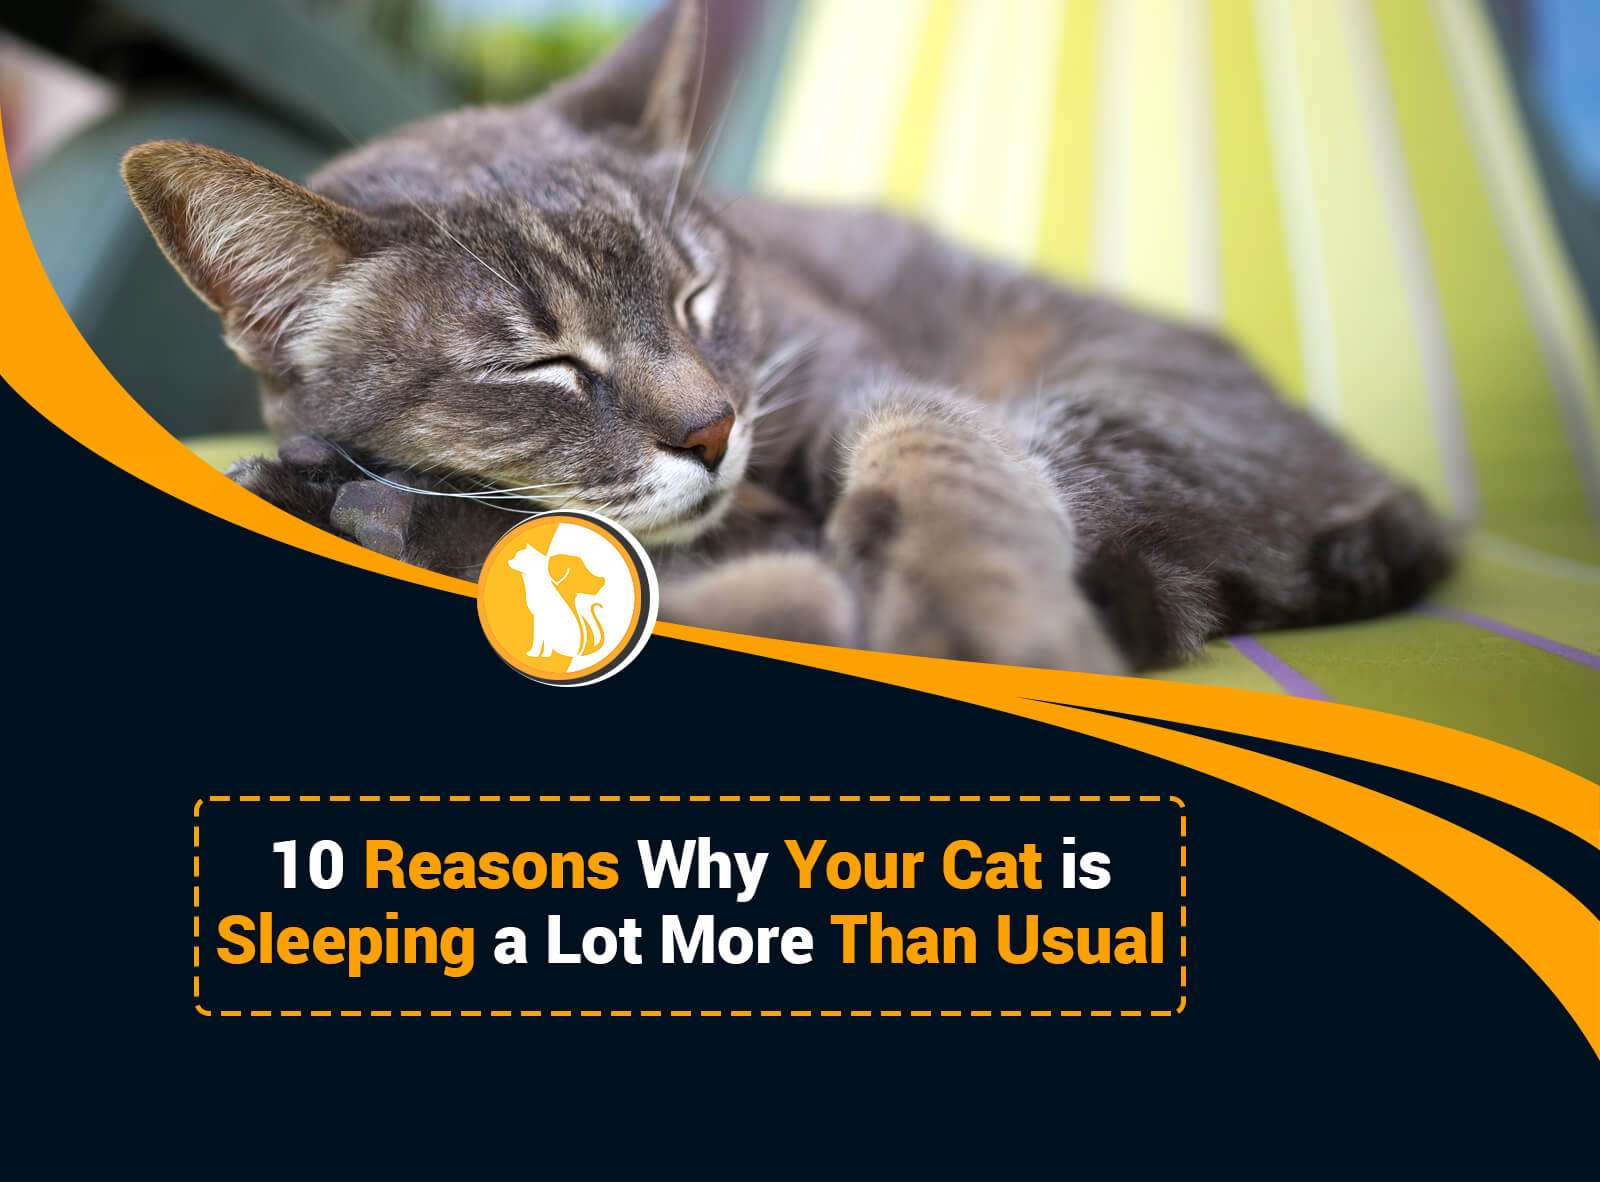 10 Reasons Why Your Cat is Sleeping a Lot More Than Usual